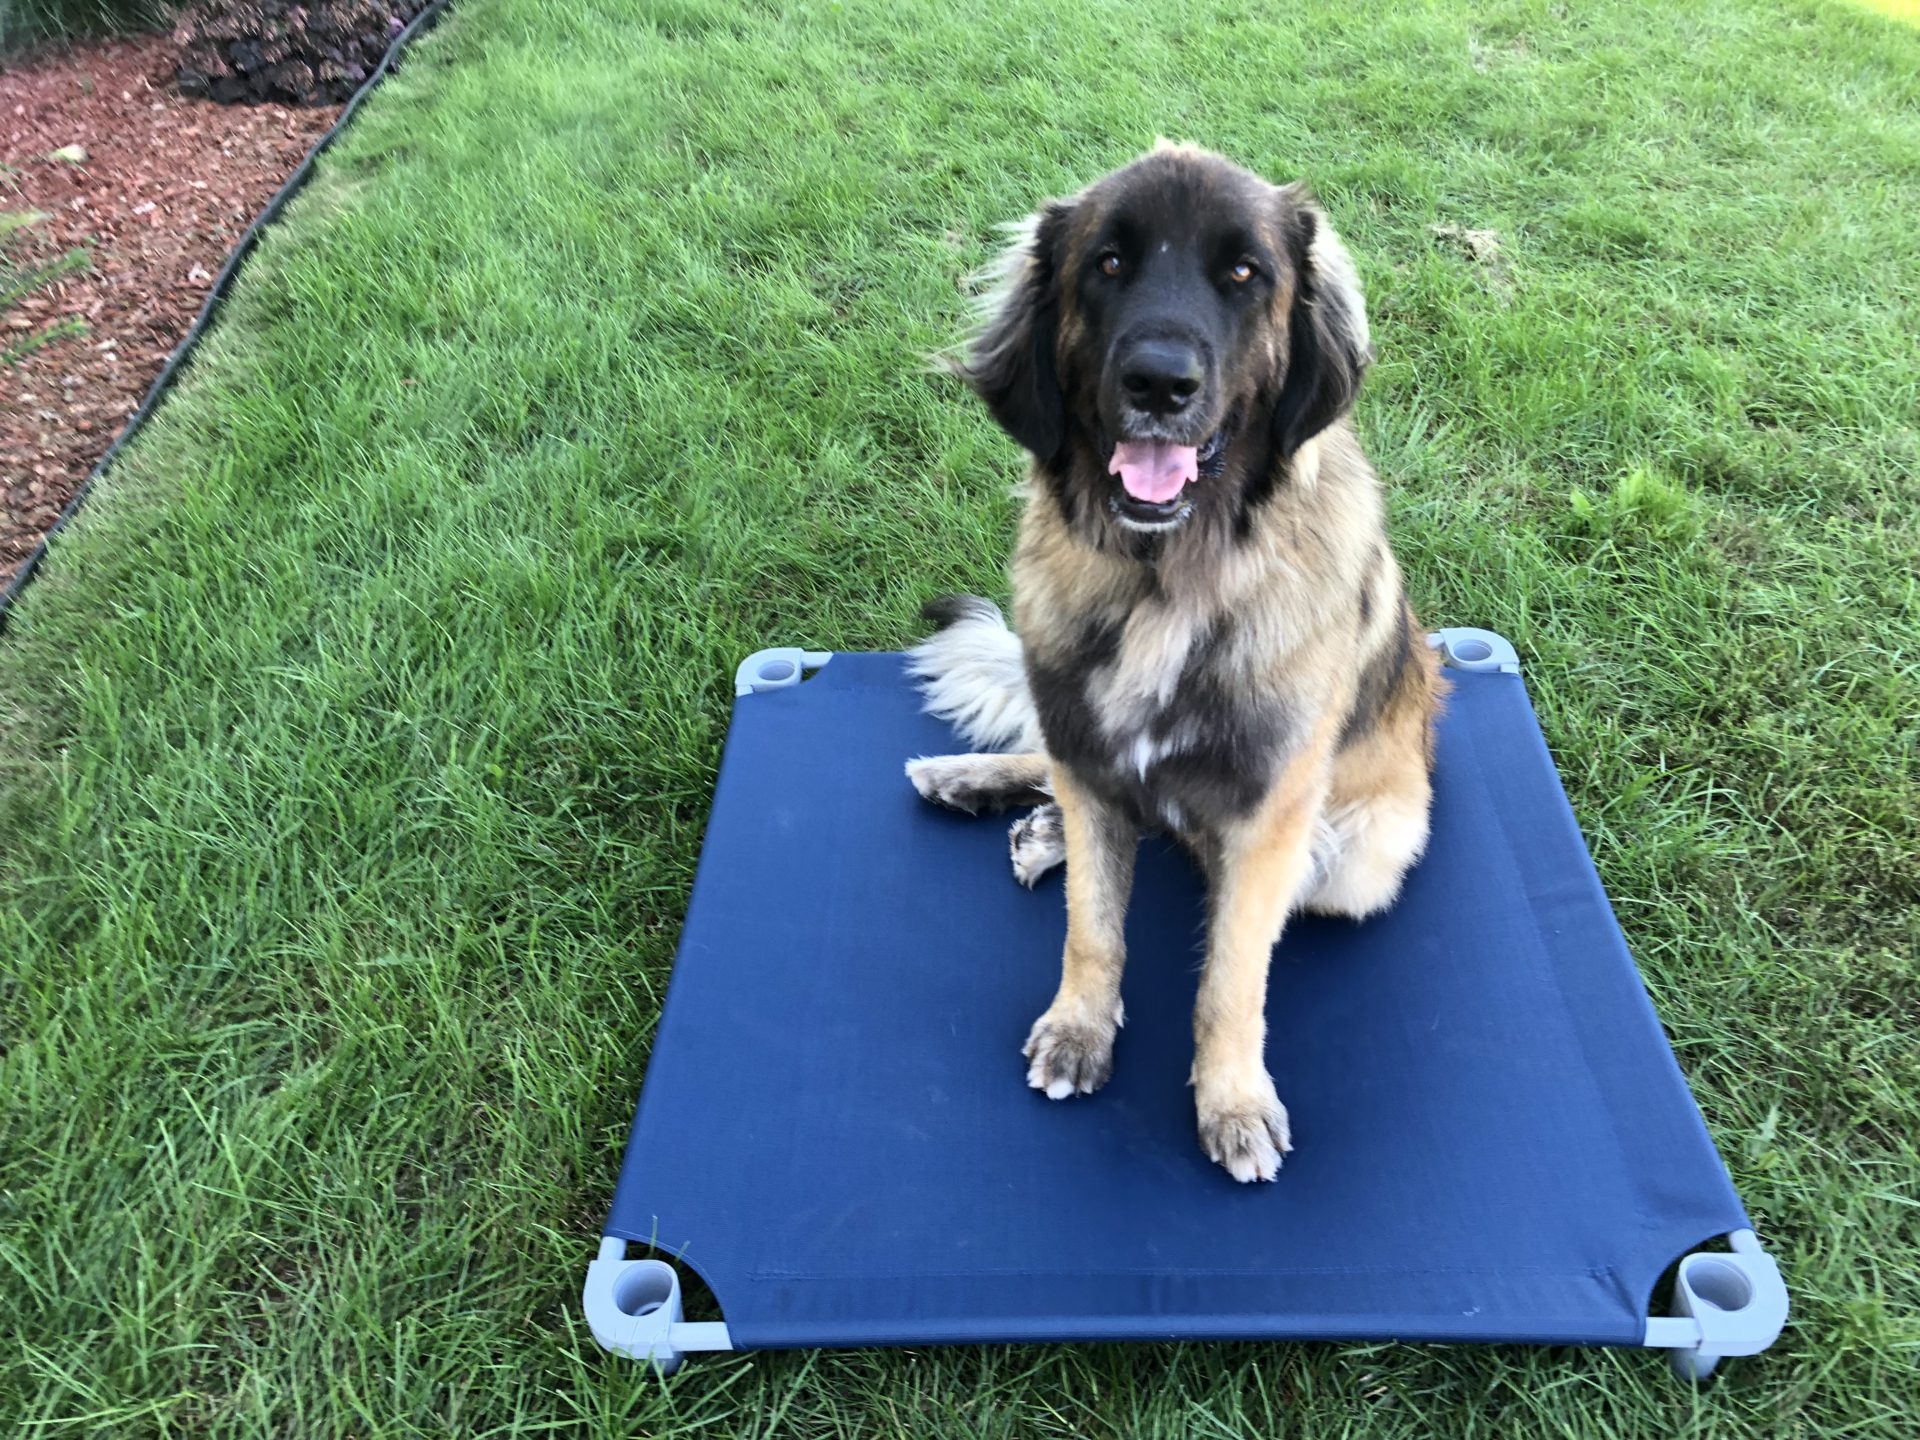 4Legs4Pets Place Board – Large Square Dog Training Cot